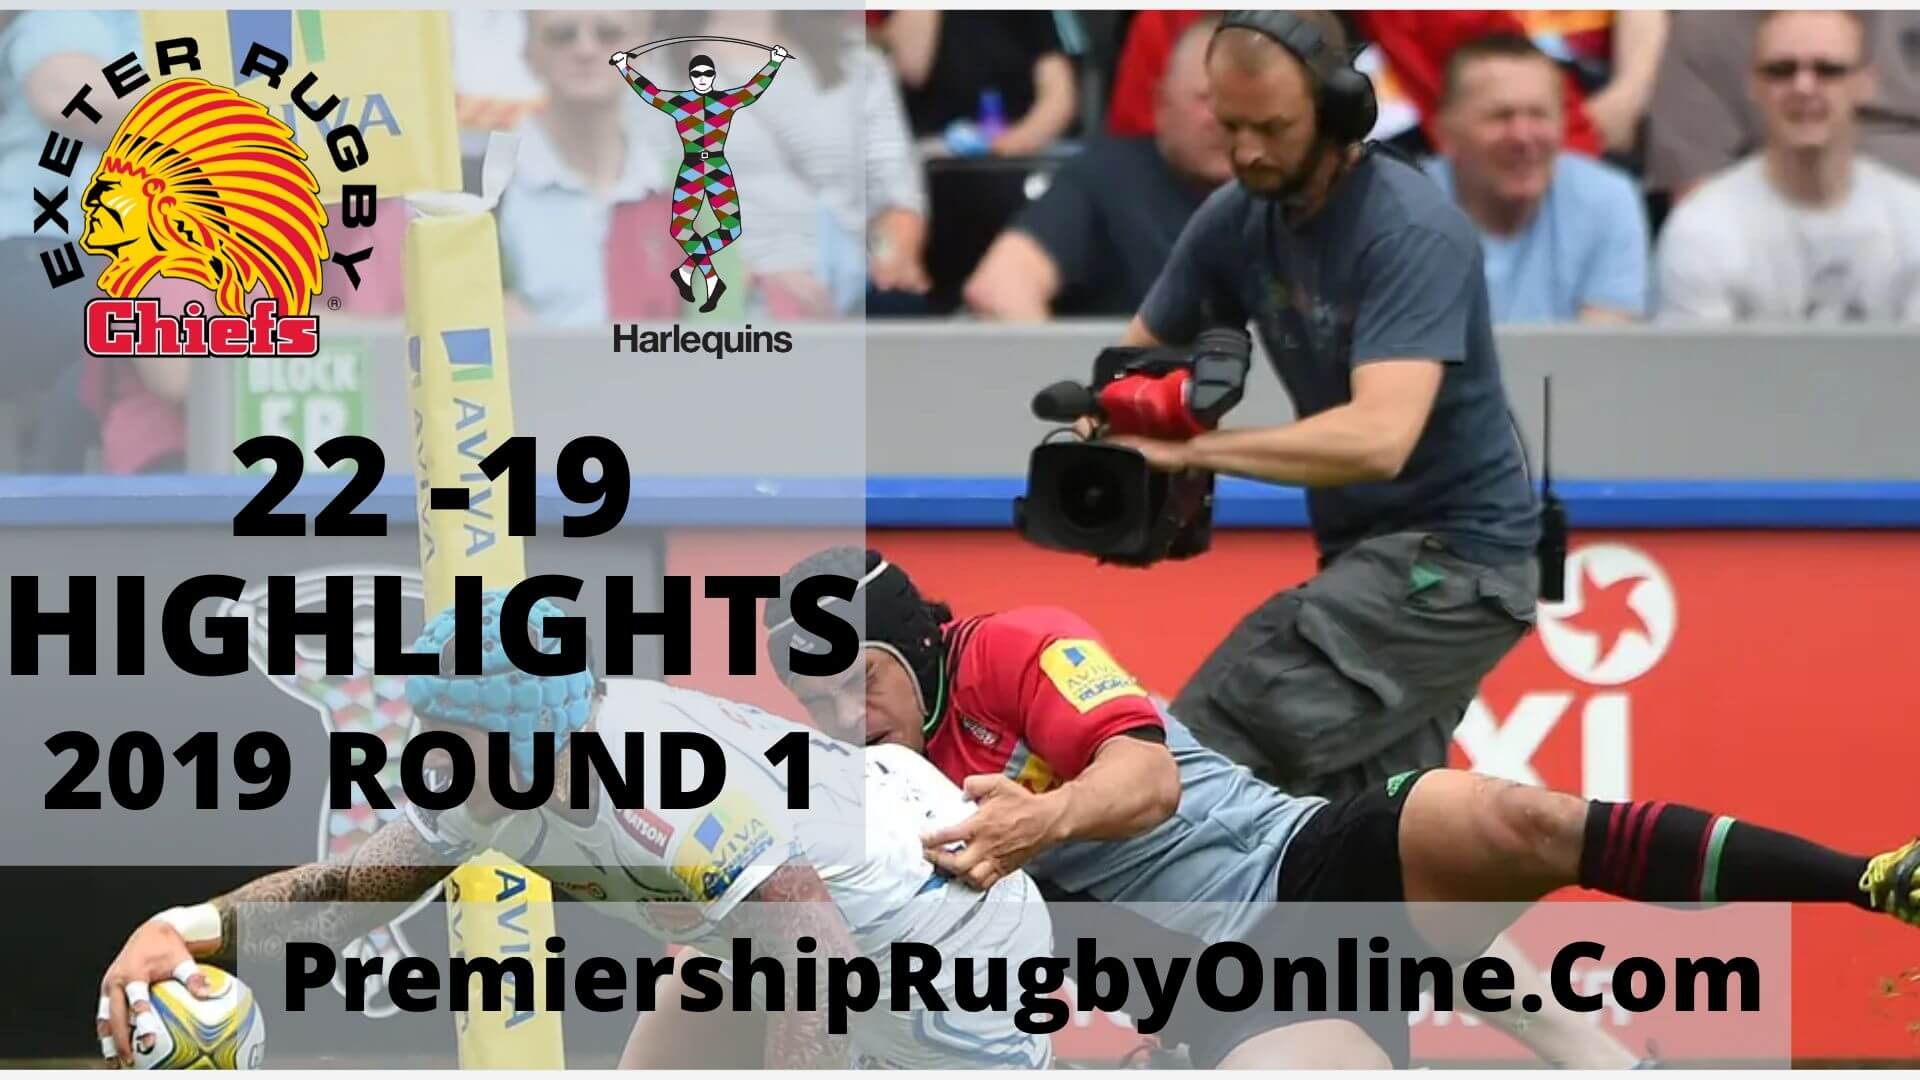 Exeter Chiefs vs Harlequins Highlights 2019 Round 1